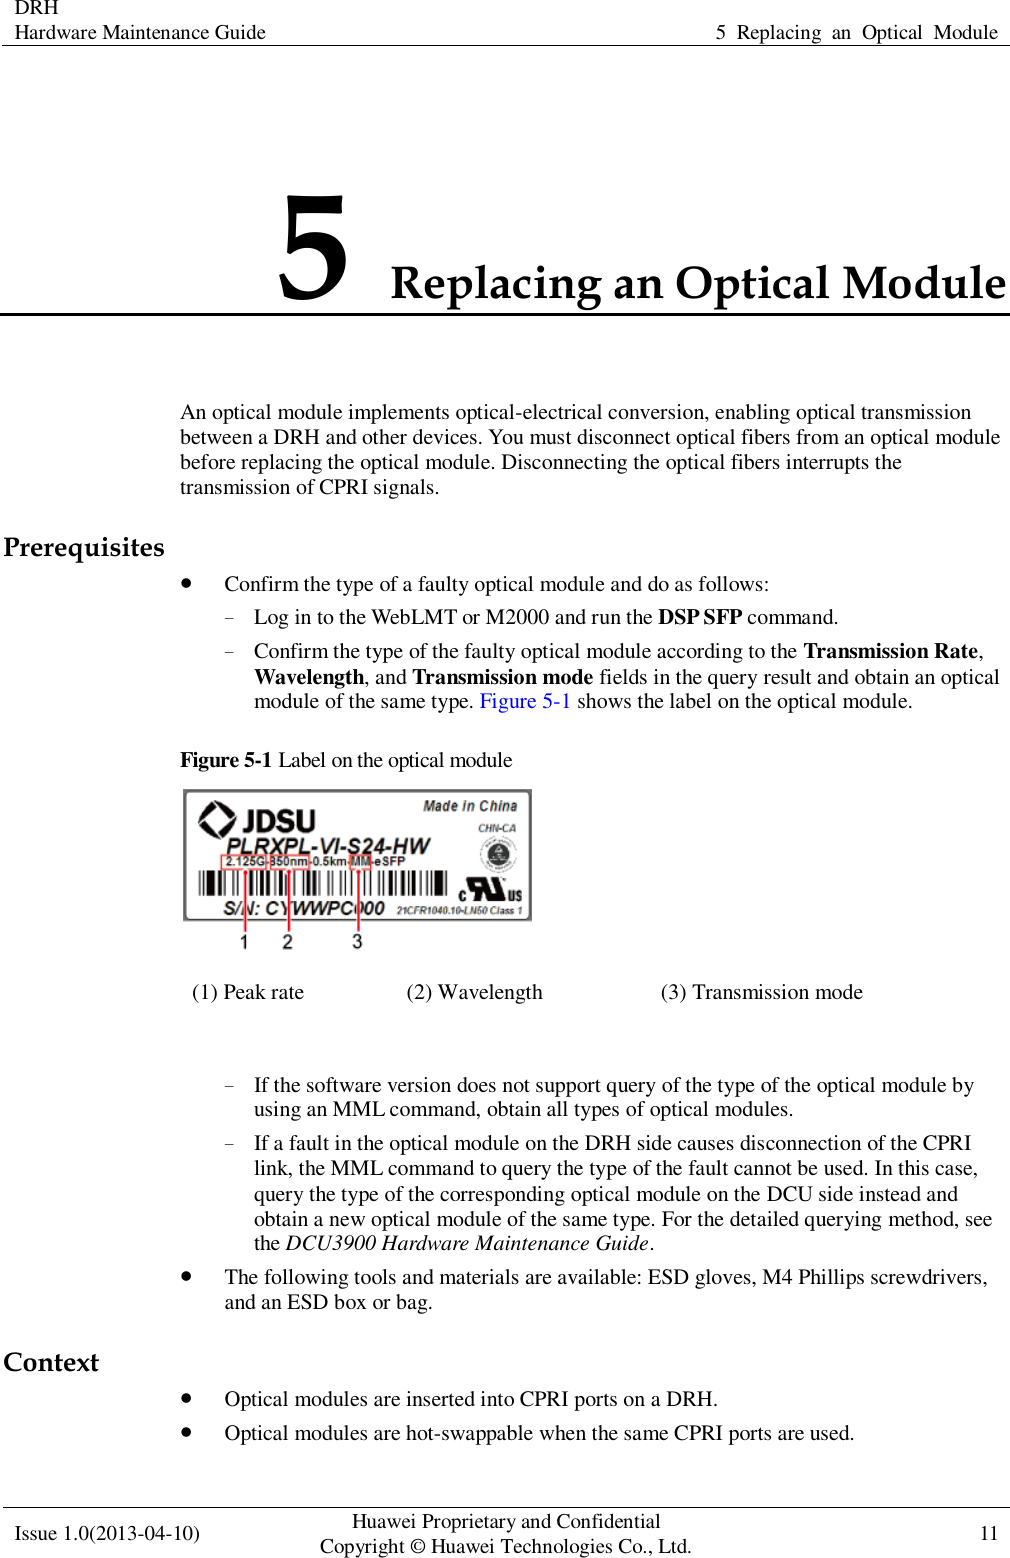  DRH Hardware Maintenance Guide   5  Replacing  an  Optical  Module  Issue 1.0(2013-04-10) Huawei Proprietary and Confidential                                     Copyright © Huawei Technologies Co., Ltd. 11    5 Replacing an Optical Module An optical module implements optical-electrical conversion, enabling optical transmission between a DRH and other devices. You must disconnect optical fibers from an optical module before replacing the optical module. Disconnecting the optical fibers interrupts the transmission of CPRI signals. Prerequisites  Confirm the type of a faulty optical module and do as follows: − Log in to the WebLMT or M2000 and run the DSP SFP command. − Confirm the type of the faulty optical module according to the Transmission Rate, Wavelength, and Transmission mode fields in the query result and obtain an optical module of the same type. Figure 5-1 shows the label on the optical module. Figure 5-1 Label on the optical module  (1) Peak rate (2) Wavelength (3) Transmission mode  − If the software version does not support query of the type of the optical module by using an MML command, obtain all types of optical modules. − If a fault in the optical module on the DRH side causes disconnection of the CPRI link, the MML command to query the type of the fault cannot be used. In this case, query the type of the corresponding optical module on the DCU side instead and obtain a new optical module of the same type. For the detailed querying method, see the DCU3900 Hardware Maintenance Guide.  The following tools and materials are available: ESD gloves, M4 Phillips screwdrivers, and an ESD box or bag. Context  Optical modules are inserted into CPRI ports on a DRH.  Optical modules are hot-swappable when the same CPRI ports are used. 